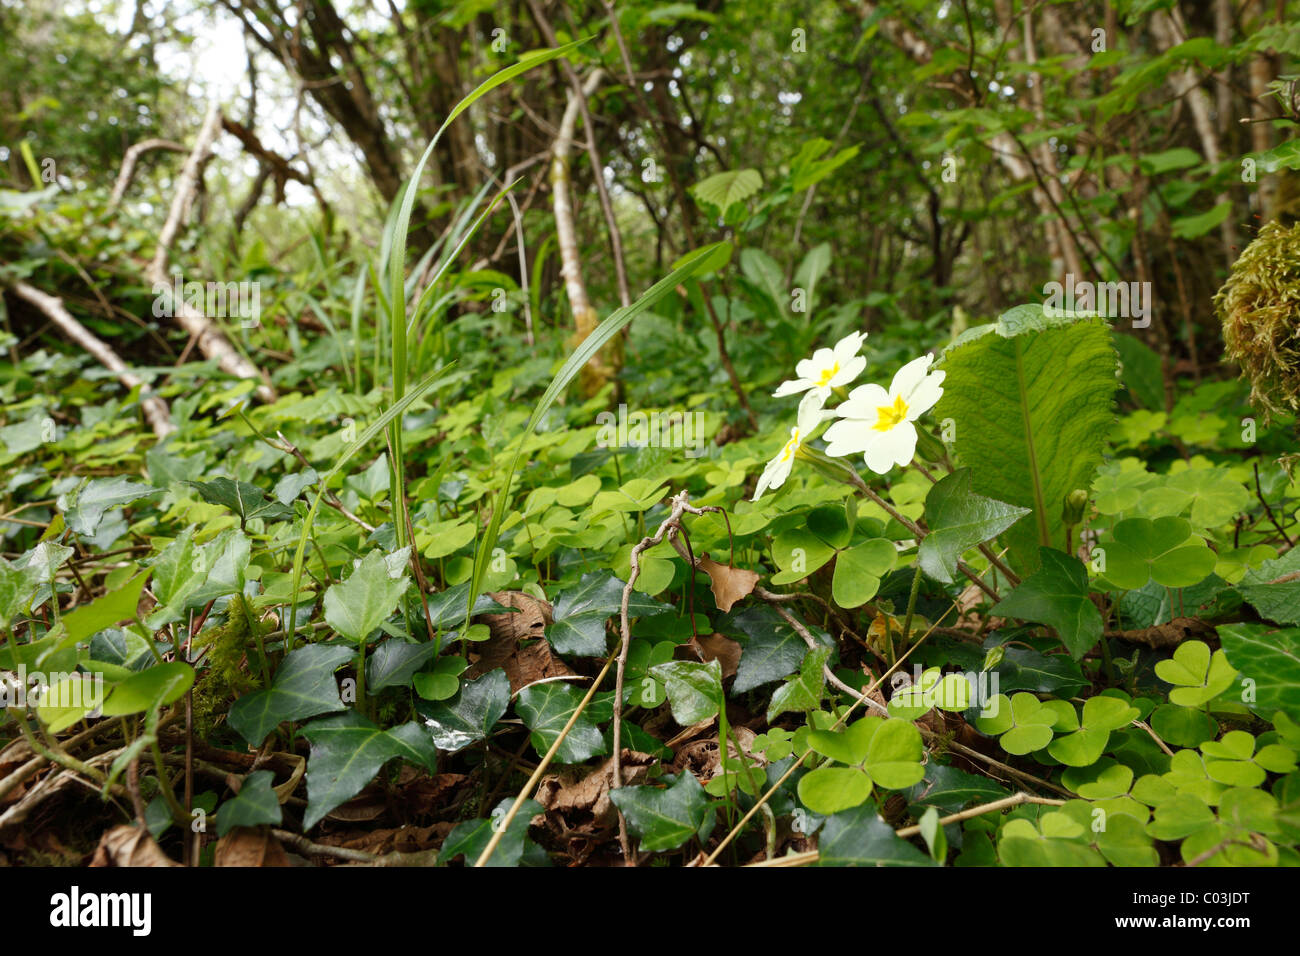 Herbs with primrose on the forest floor, Burren National Park, County Clare, Ireland, Europe Stock Photo